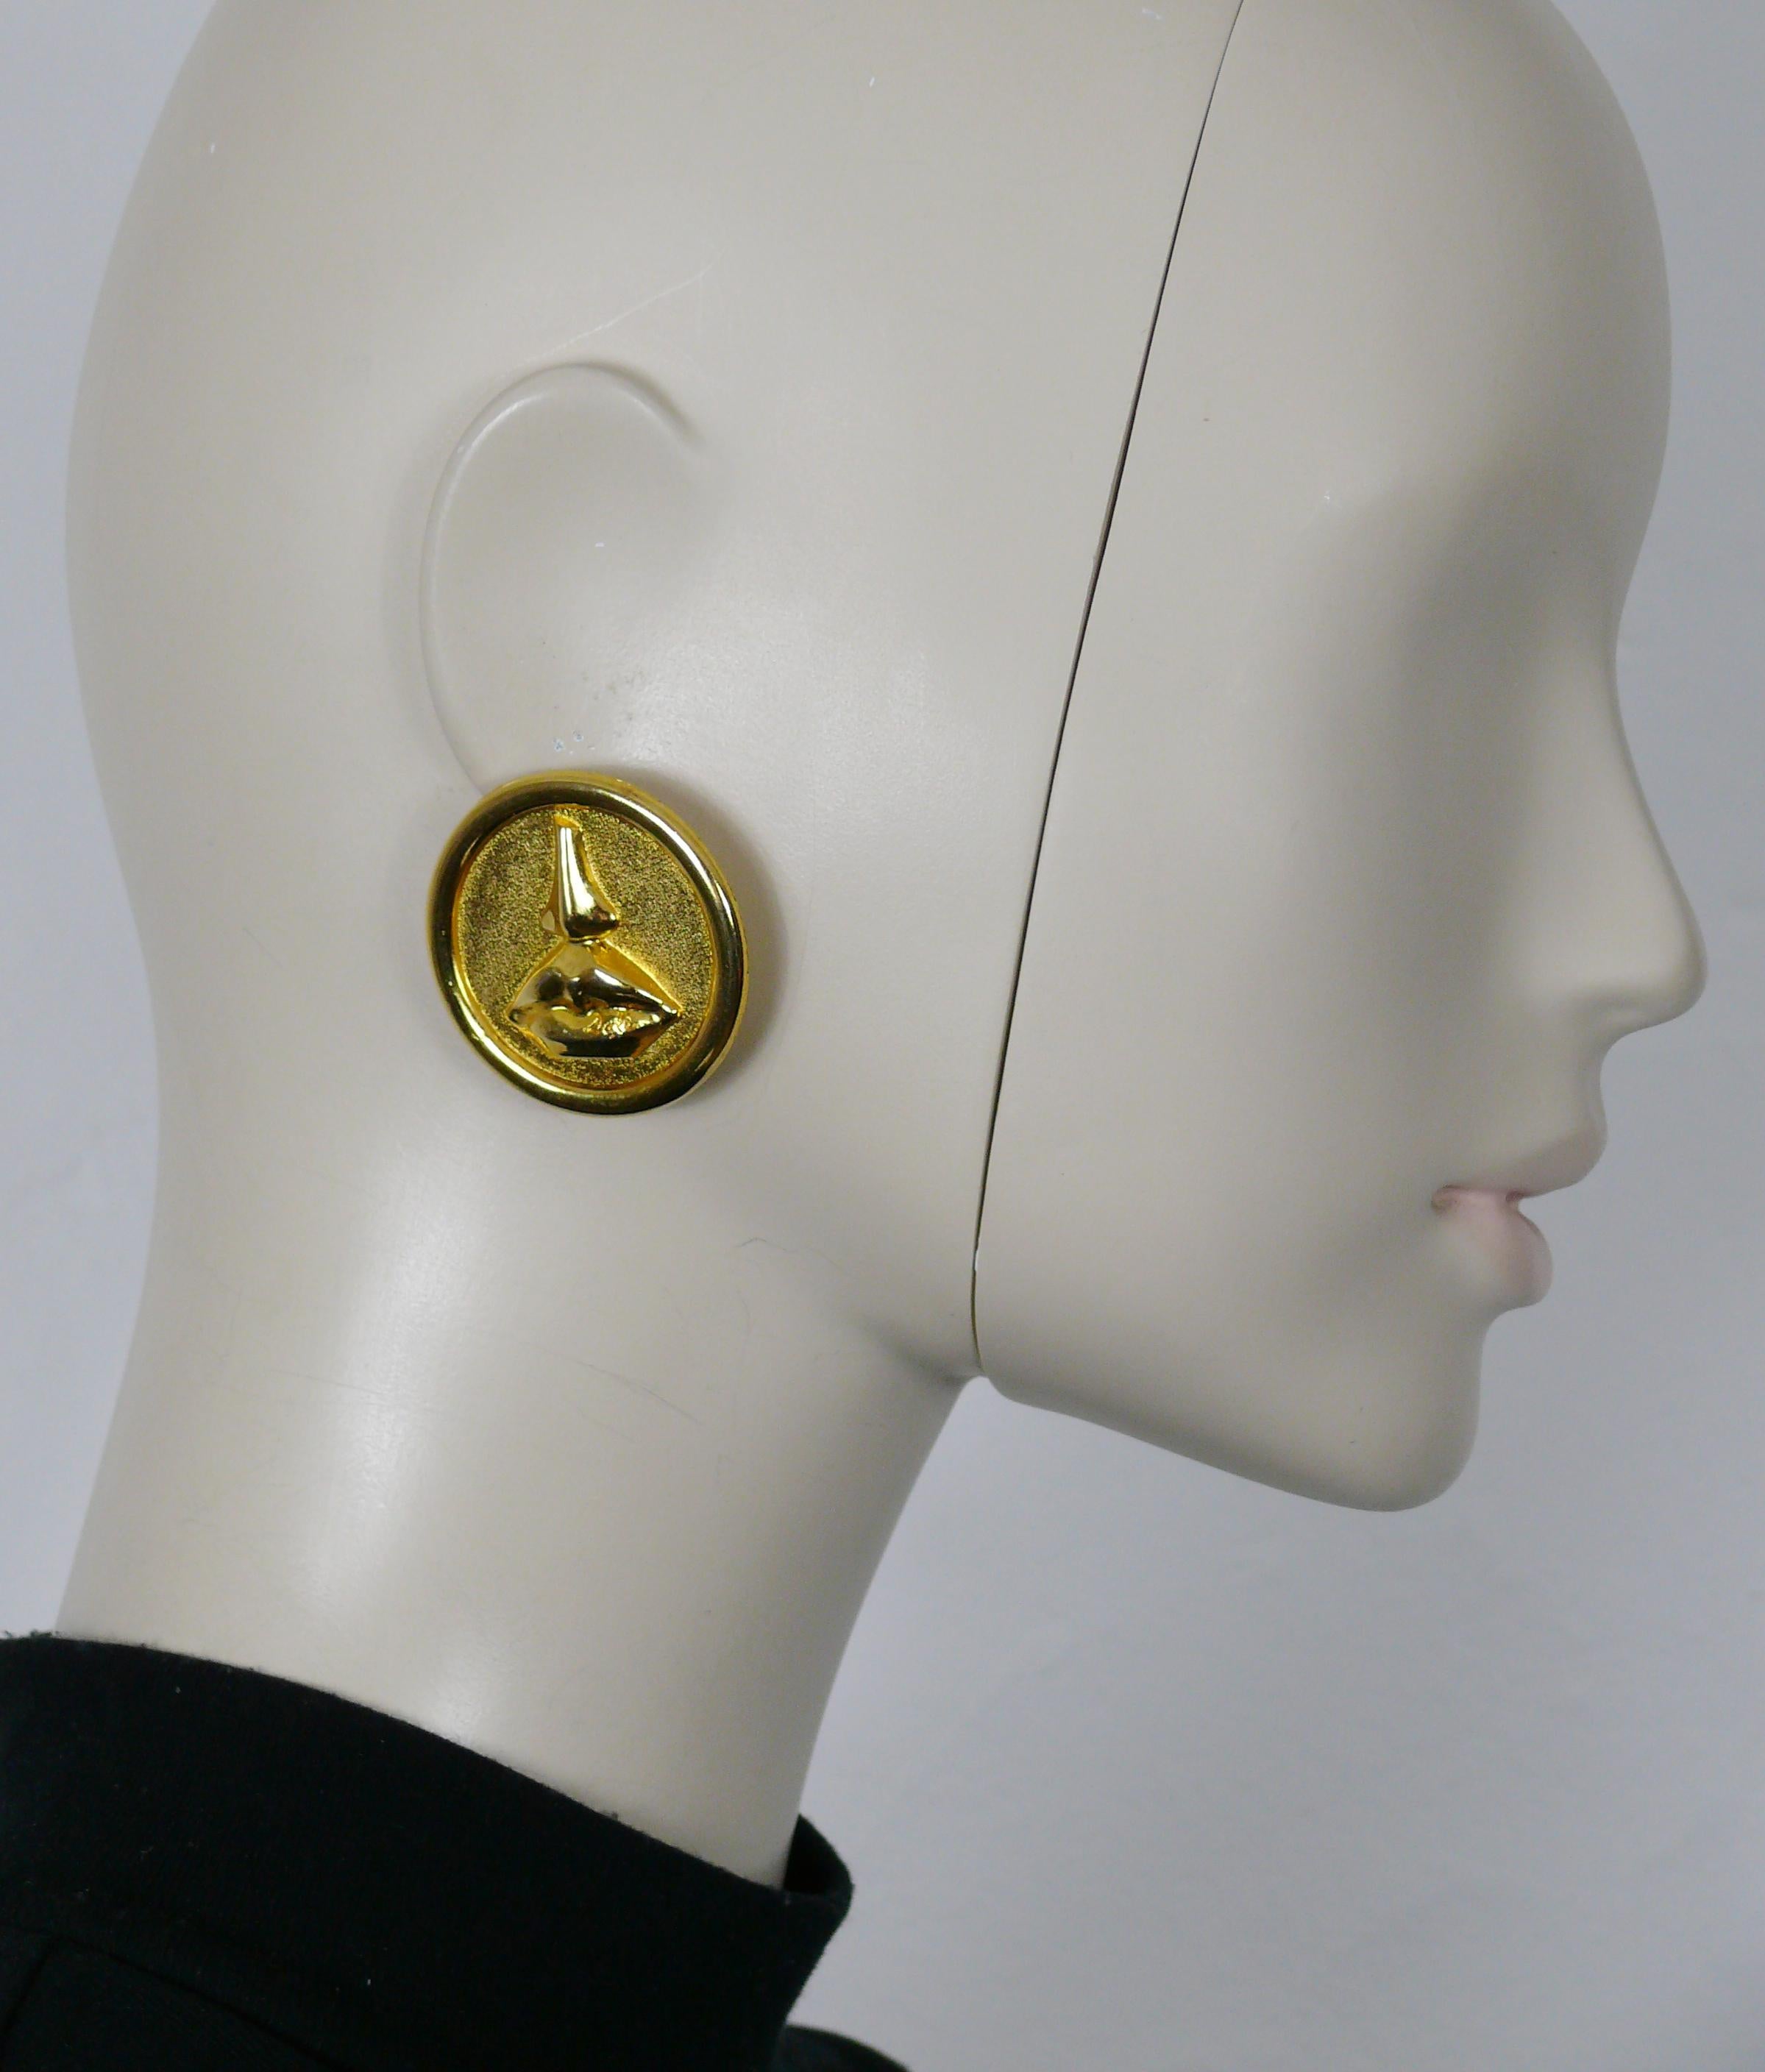 SALVADOR DALI Parfums vintage massive gold tone disc earrings (clip-on) featuring the iconic mouth and nose after Aphrodite of Cnidus.

Marked Promotion Parfums SALVADOR DALI.

Indicative measurements : diameter approx. 4 cm (1.57 inches).

Weight